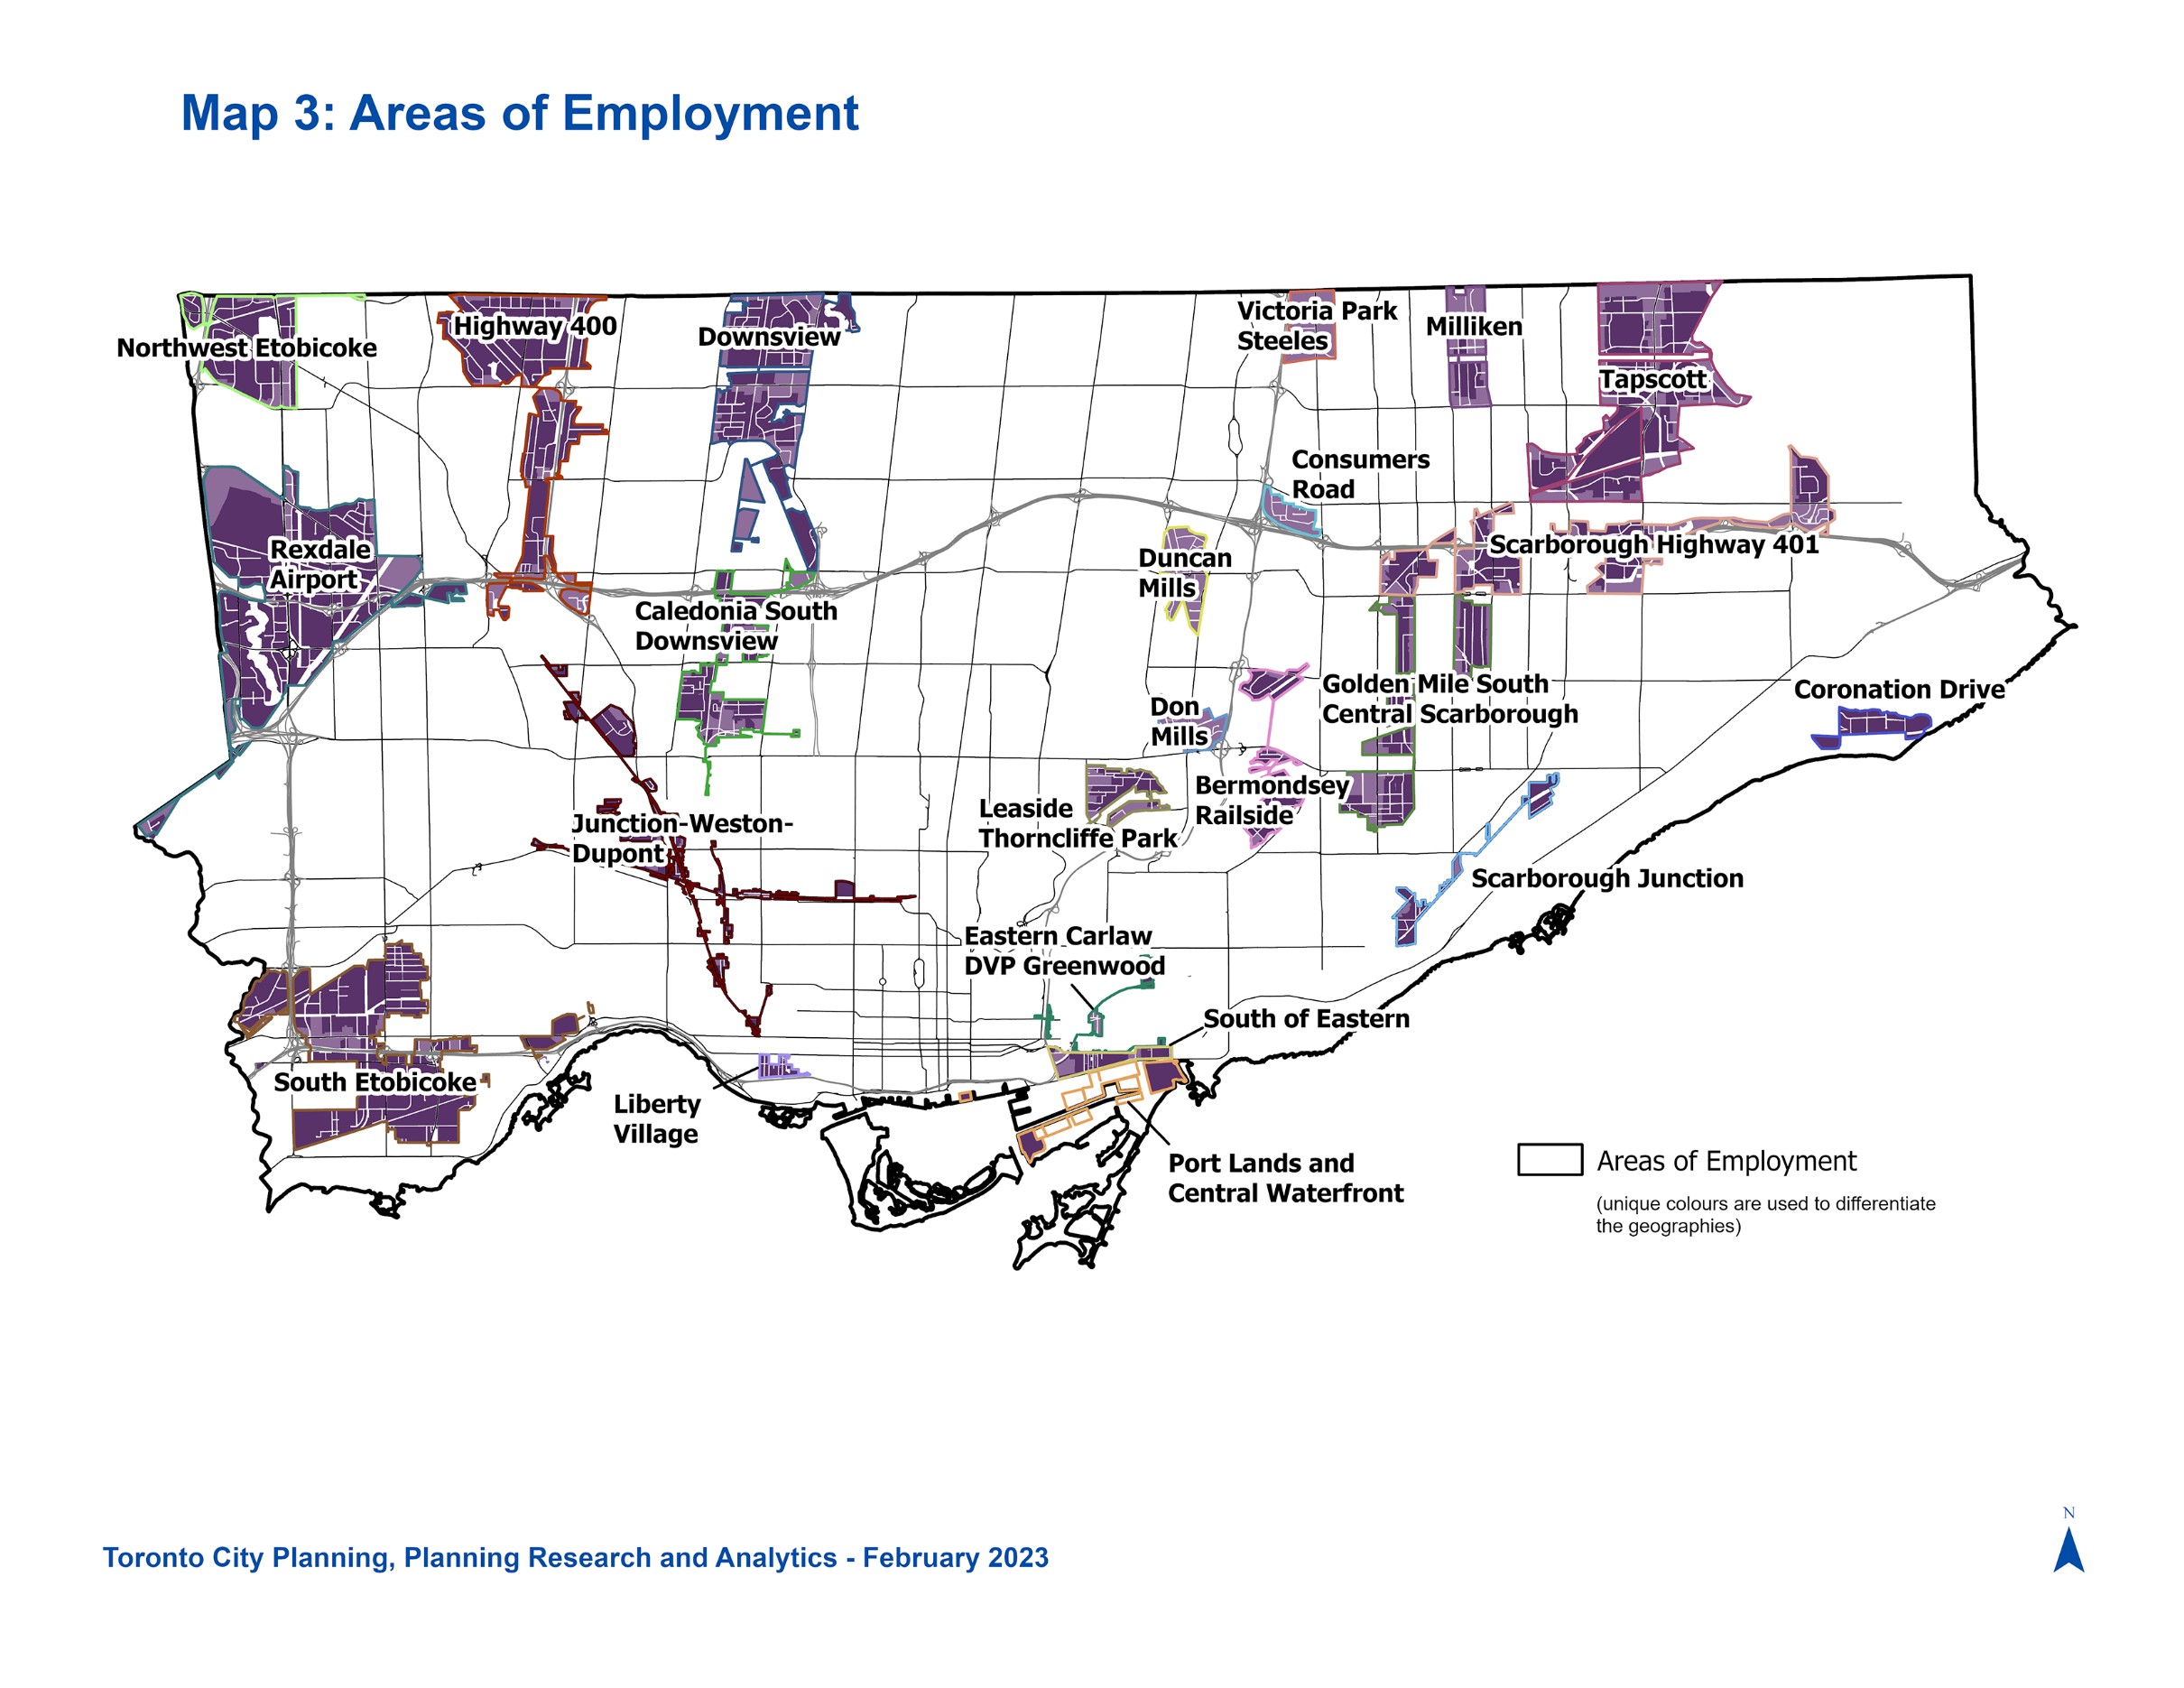 This map shows the Areas of Employment (AOEs) in the city, along with Core and General Employment Areas.